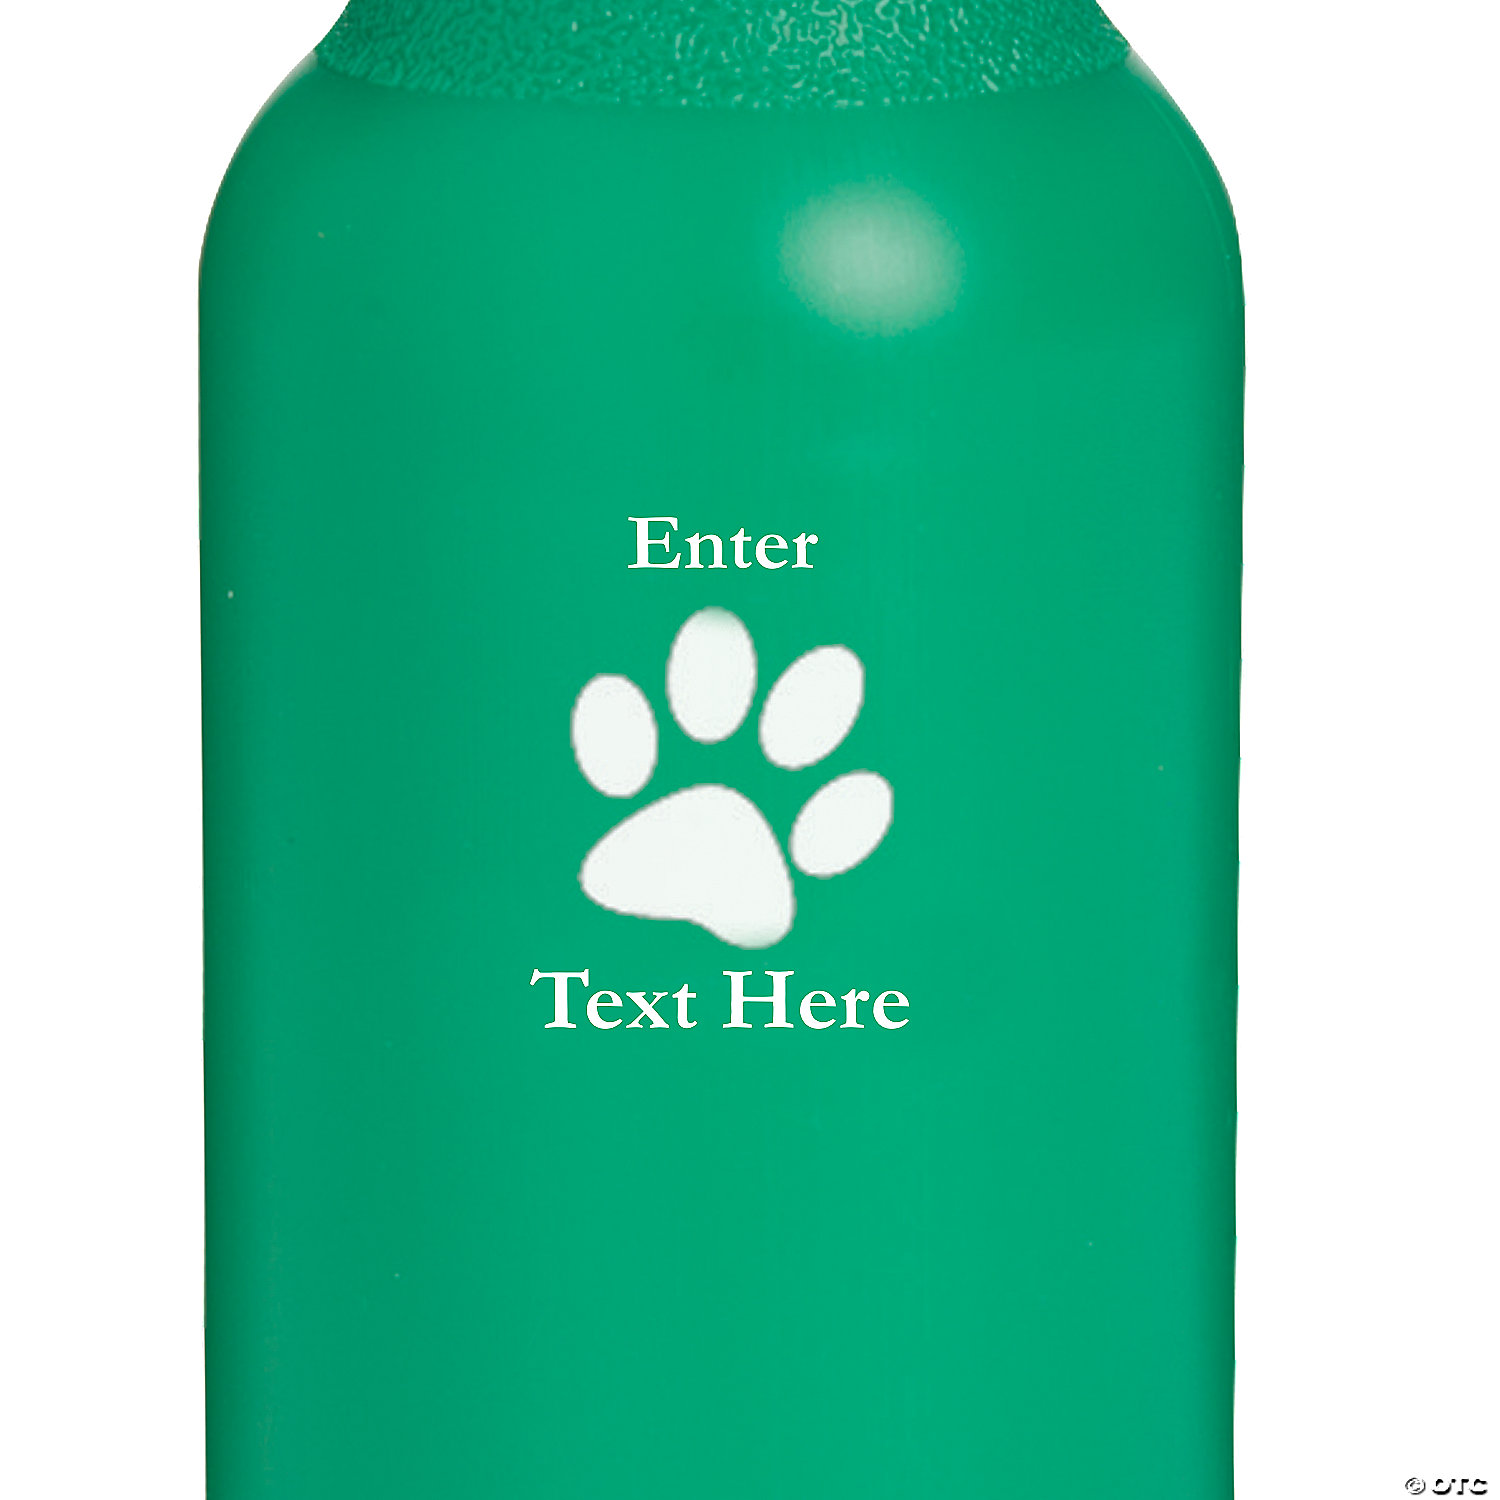 https://s7.orientaltrading.com/is/image/OrientalTrading/VIEWER_ZOOM/plastic-opaque-green-paw-print-personalized-water-bottles-20-oz~13575229-p01